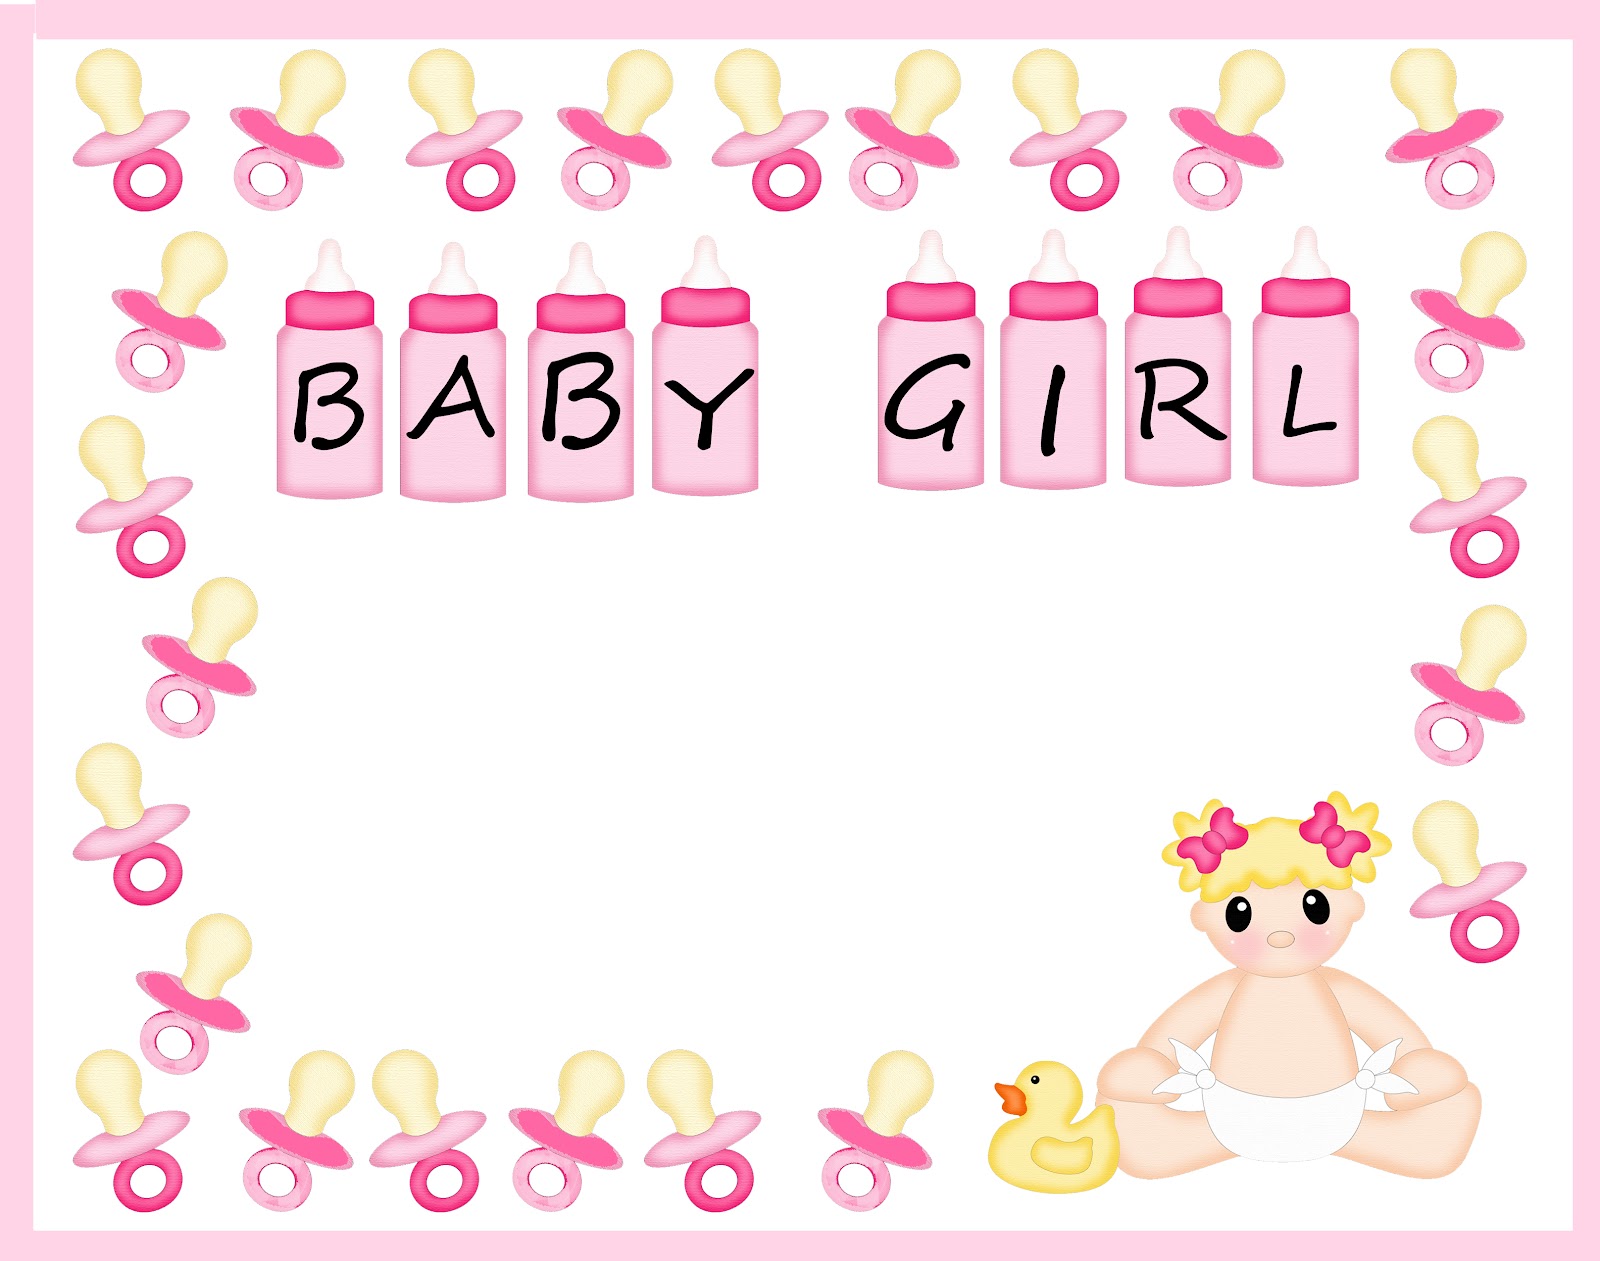 free-printable-baby-shower-borders-clipart-baby-girl-borders-20-free